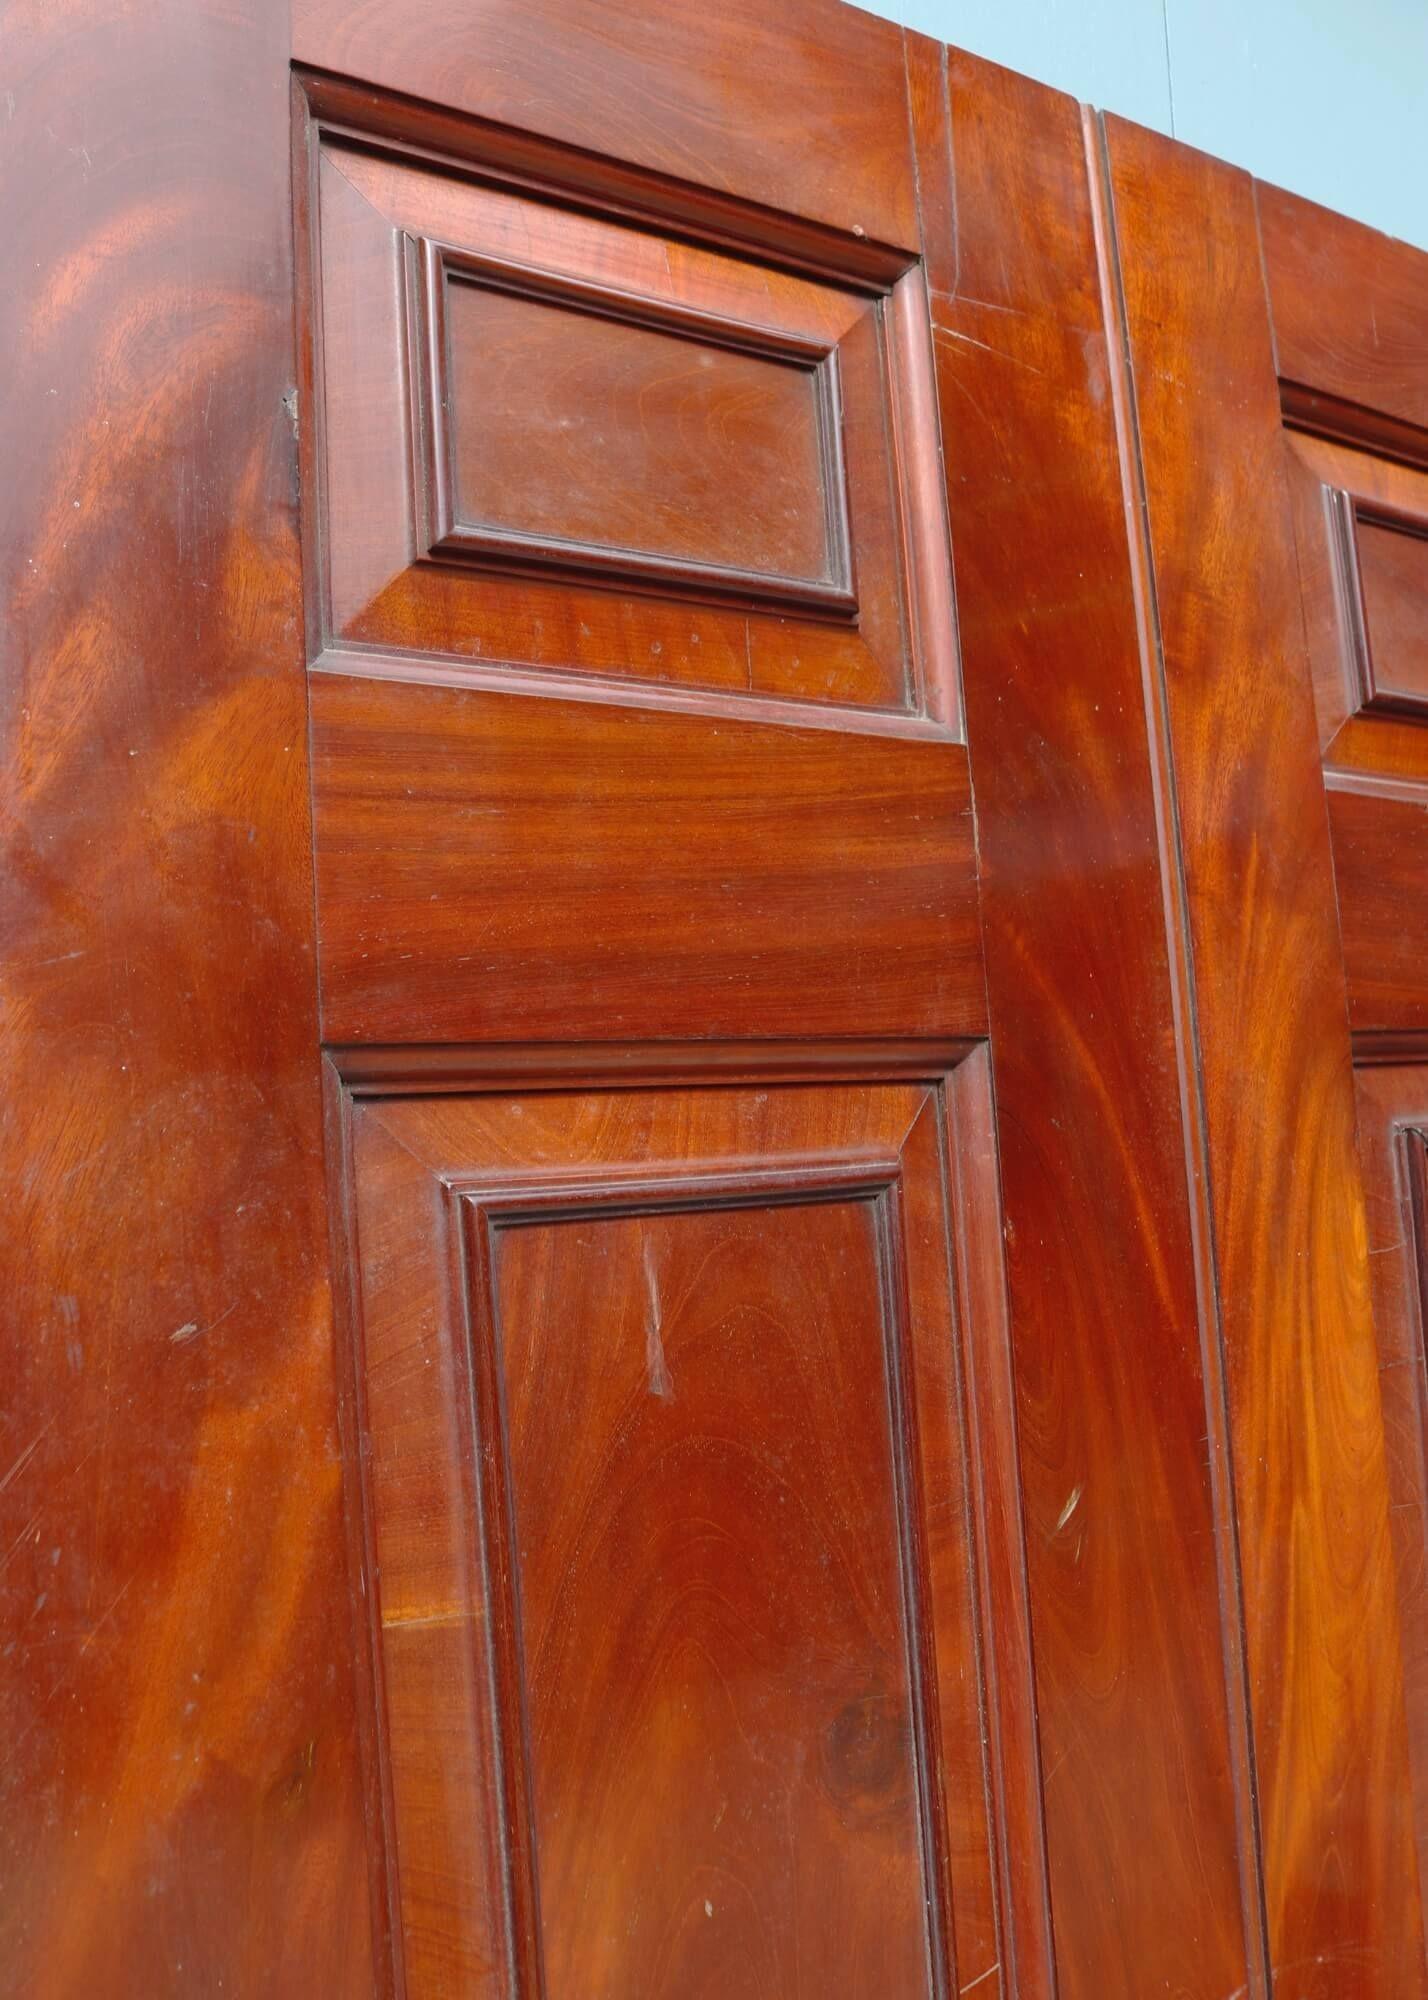 6 Panel Mahogany Georgian Internal Door In Fair Condition For Sale In Wormelow, Herefordshire